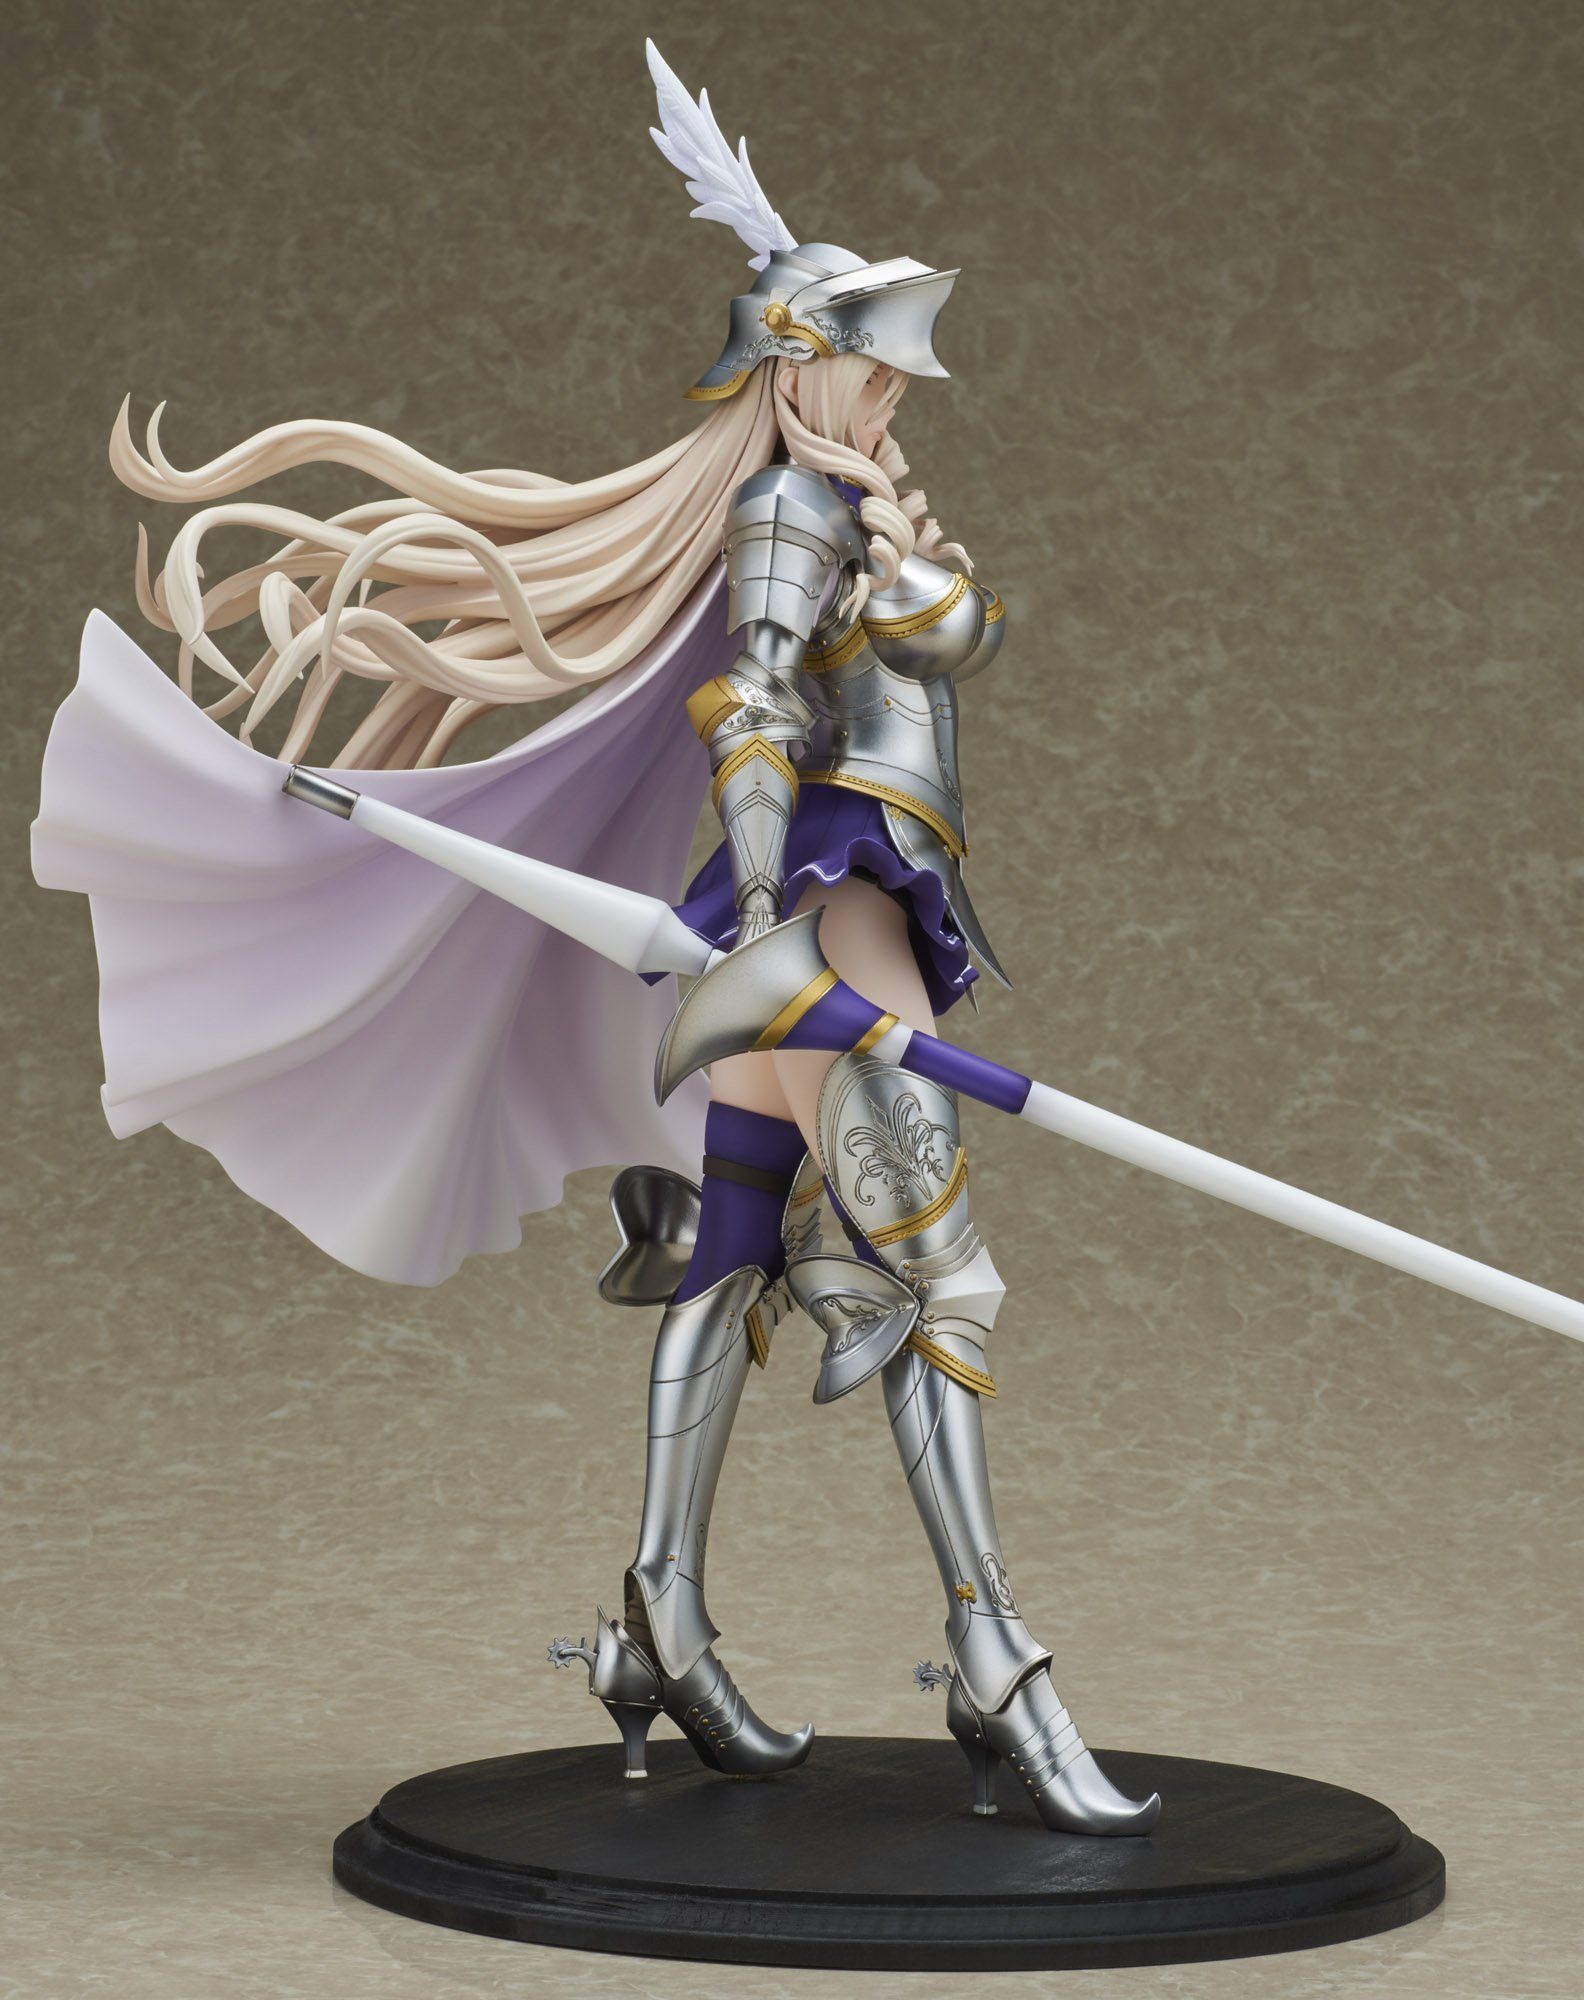 Dragon Toy Walkure Romanze: Celia Cumani Aintree PVC Figure (1:6 Scale) Online in El Salvador. dragon toy Products in El Salvador Prices, Reviews and Free Delivery over US$70.00